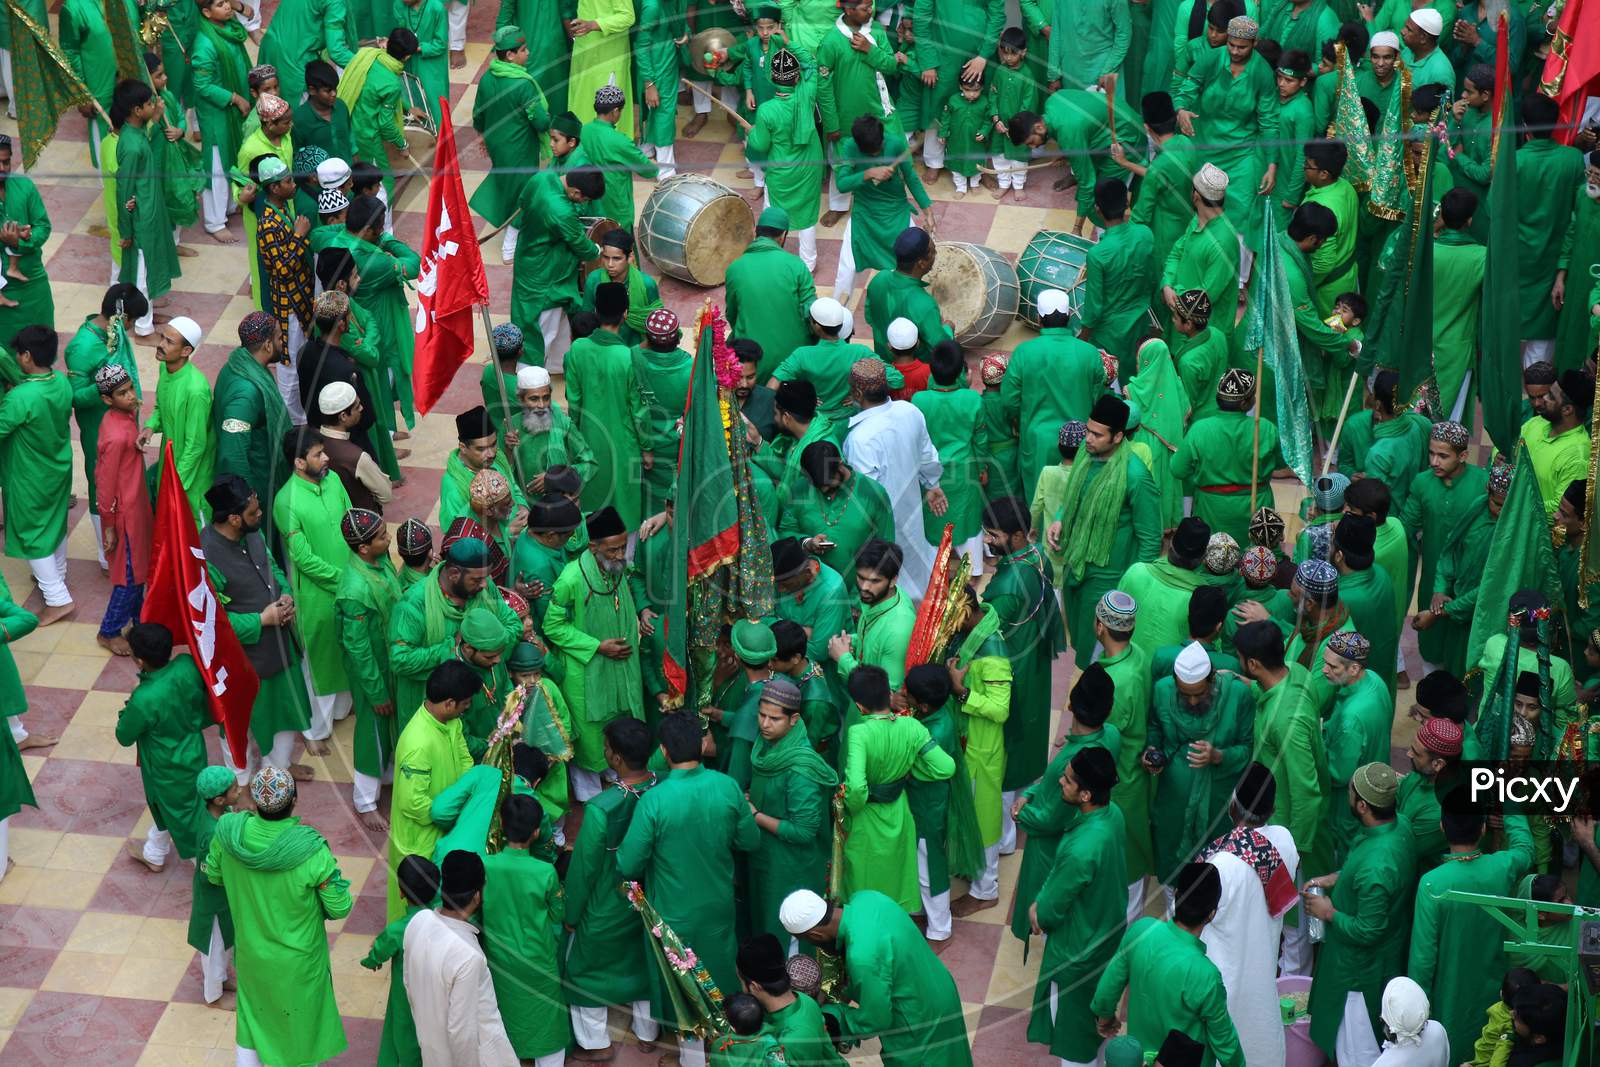 Indian Muslims participate in a procession during the sacred Islamic month of Muharram outside the shrine of Sufi saint Khwaja Moinuddin Chishti in Ajmer, Rajasthan, India.